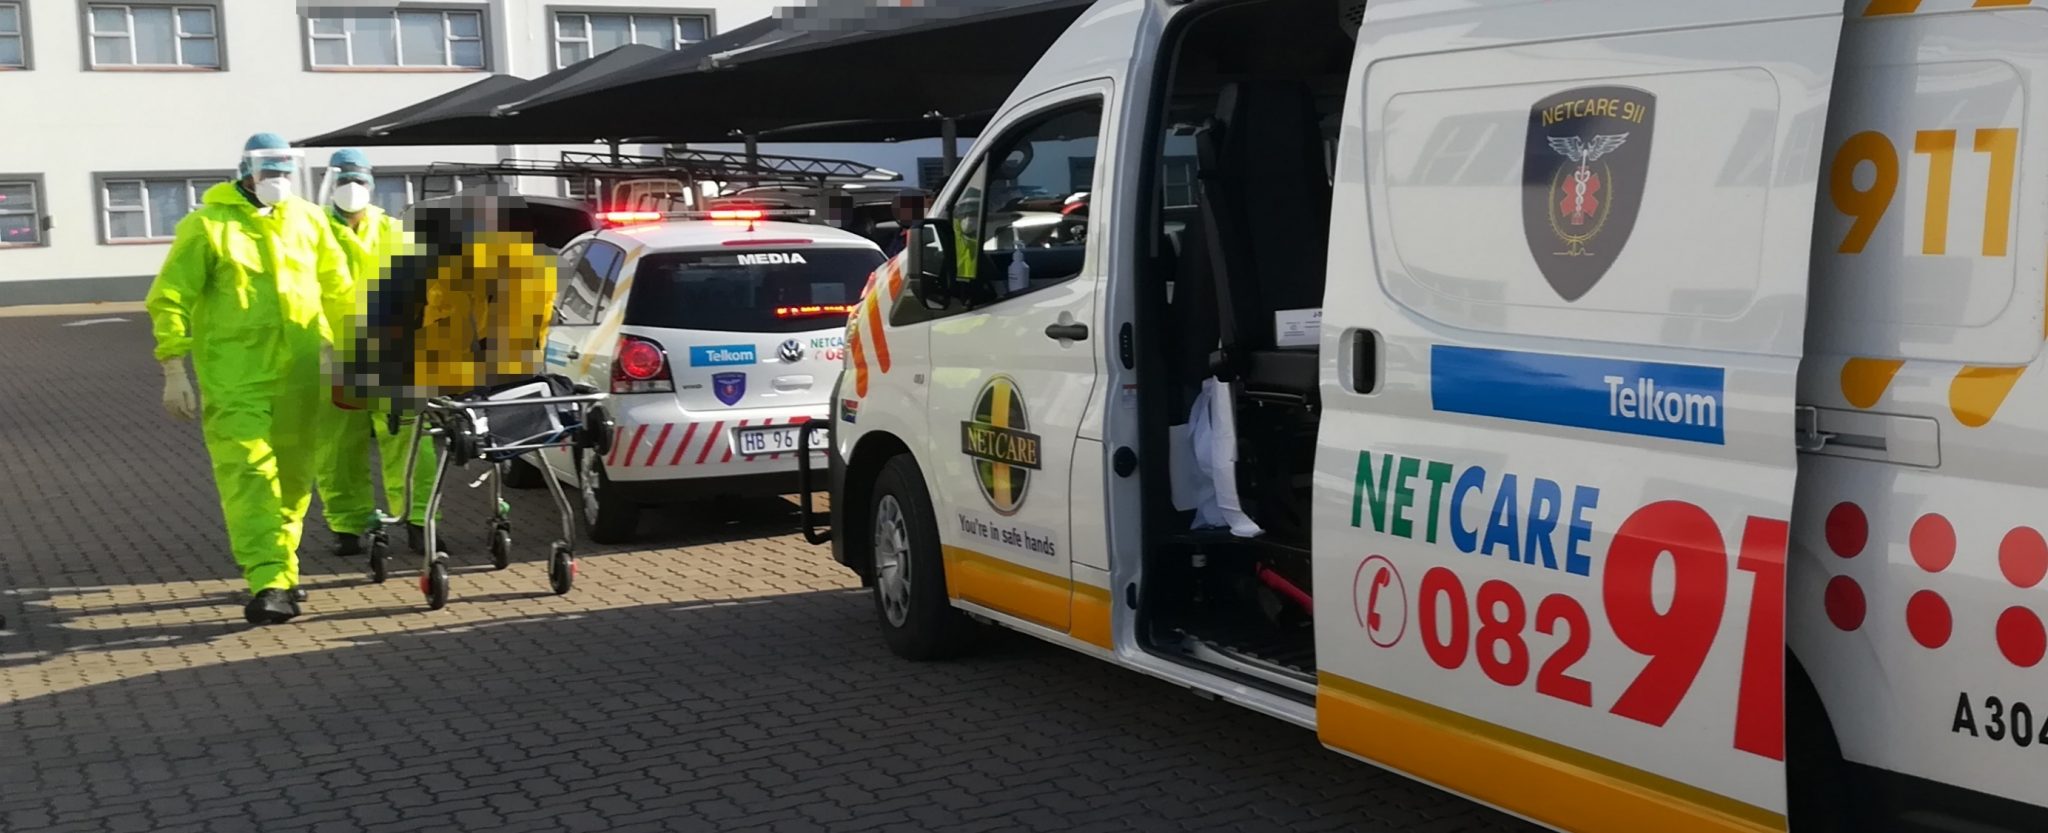 KwaZulu-Natal: Three year old critical after being mauled by pitbull